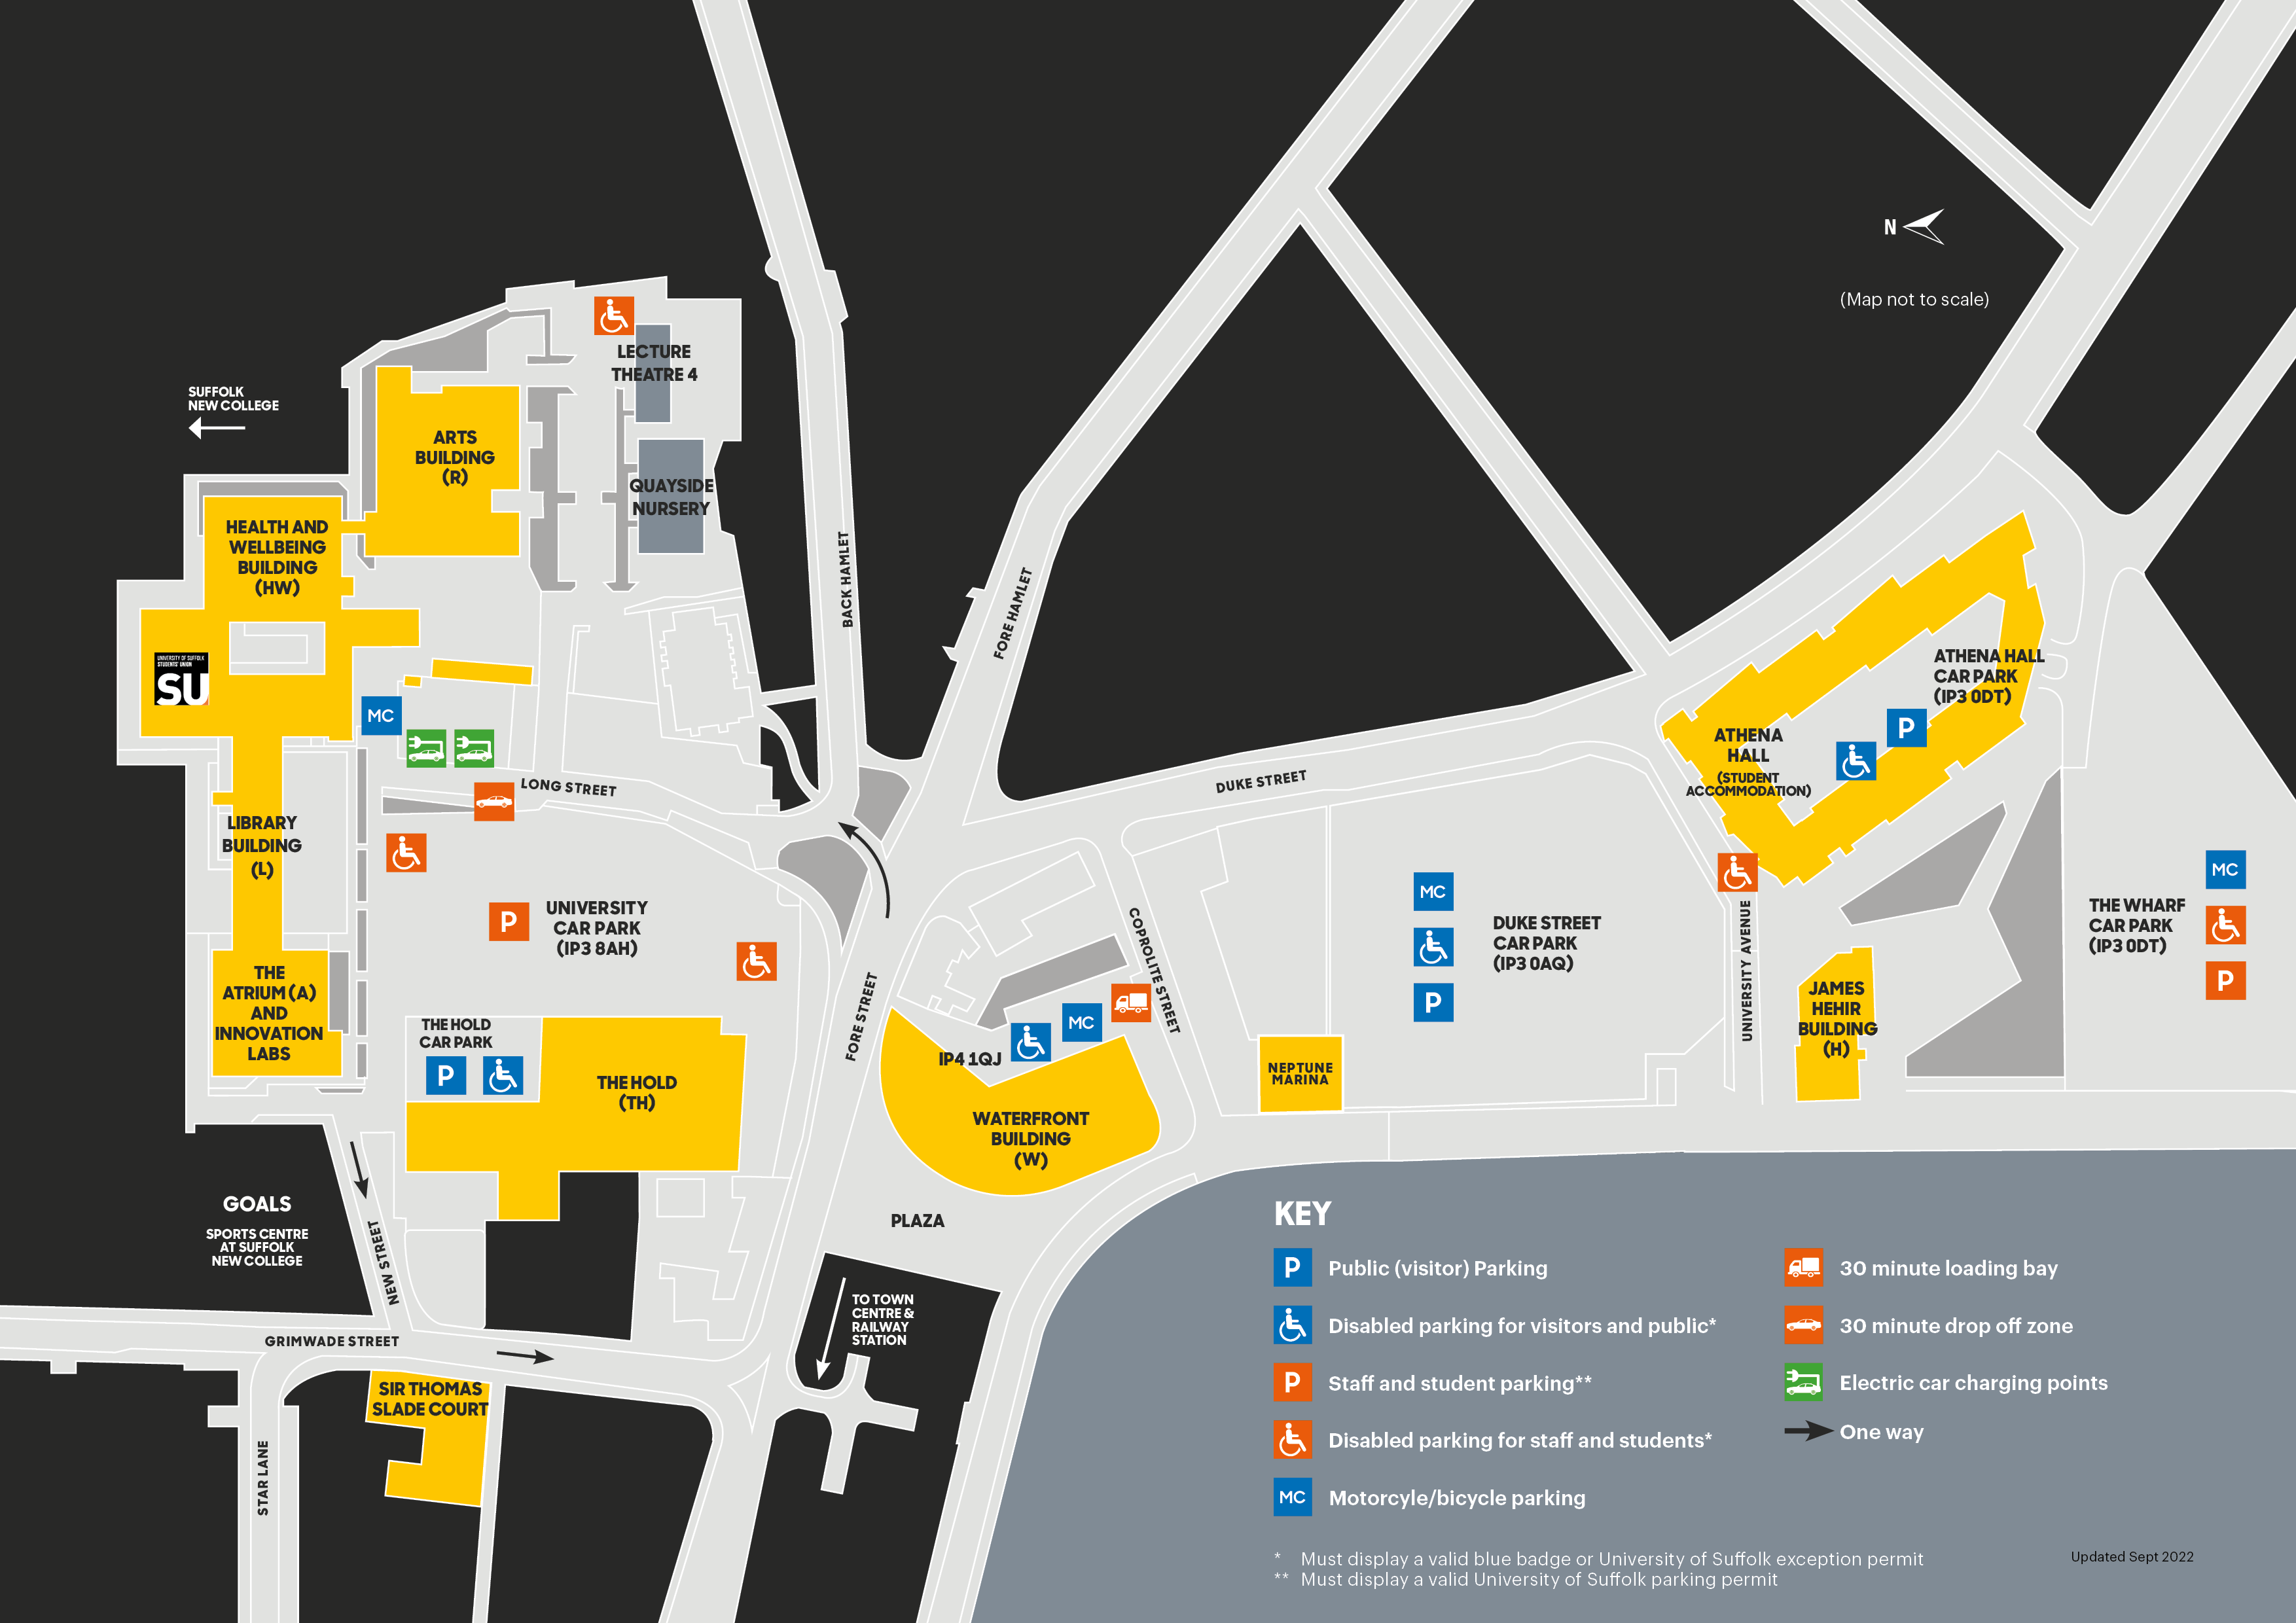 A map of the Ipswich campus